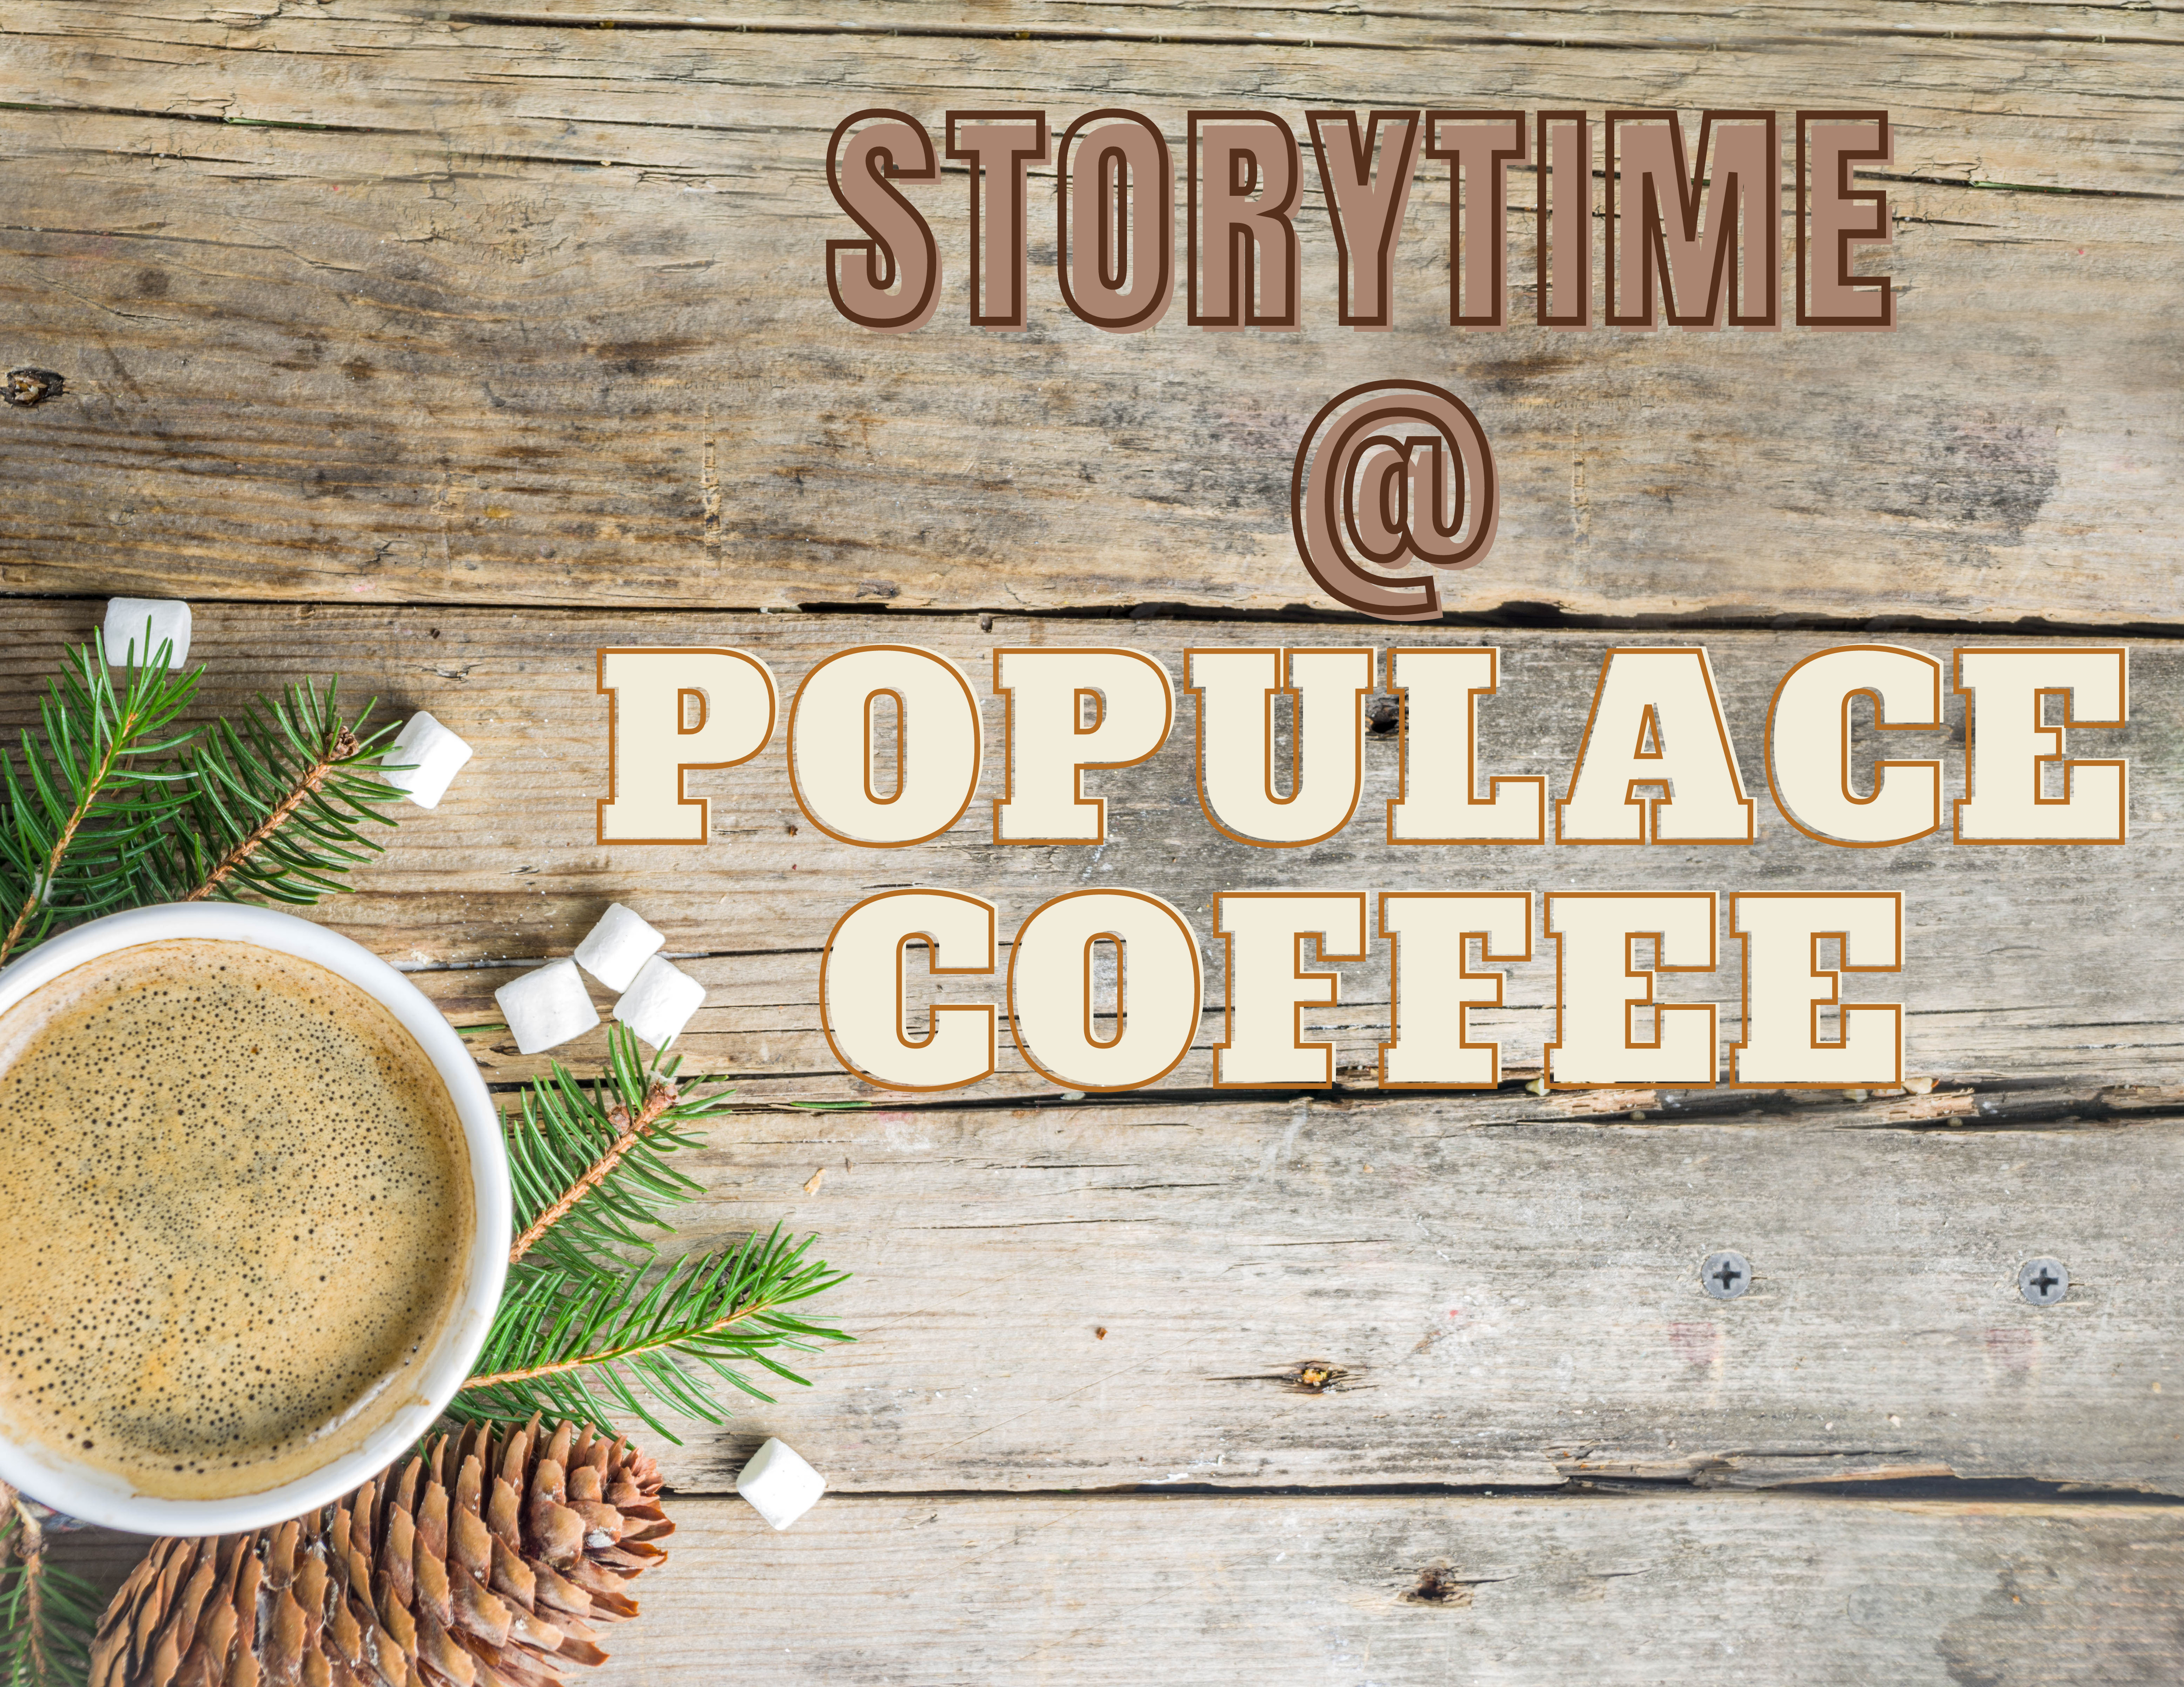 storytime populace coffee